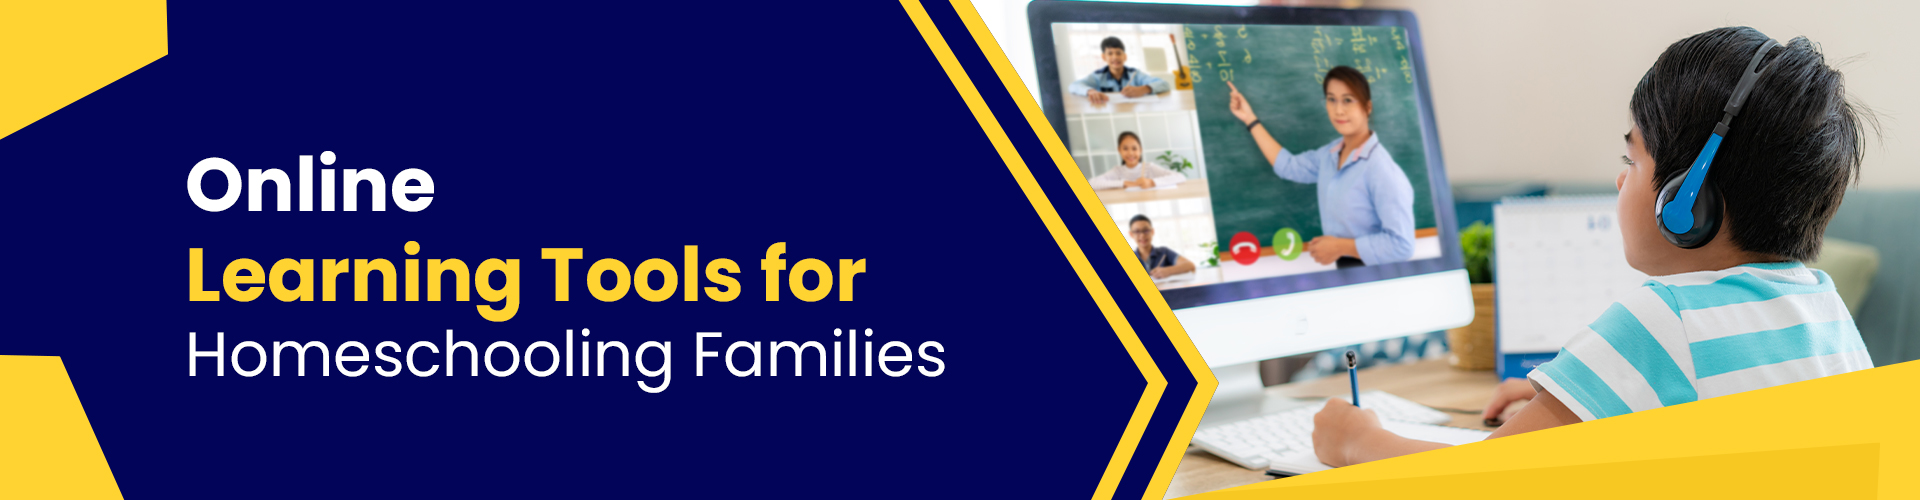 Online Learning Tools for Homeschooling Families